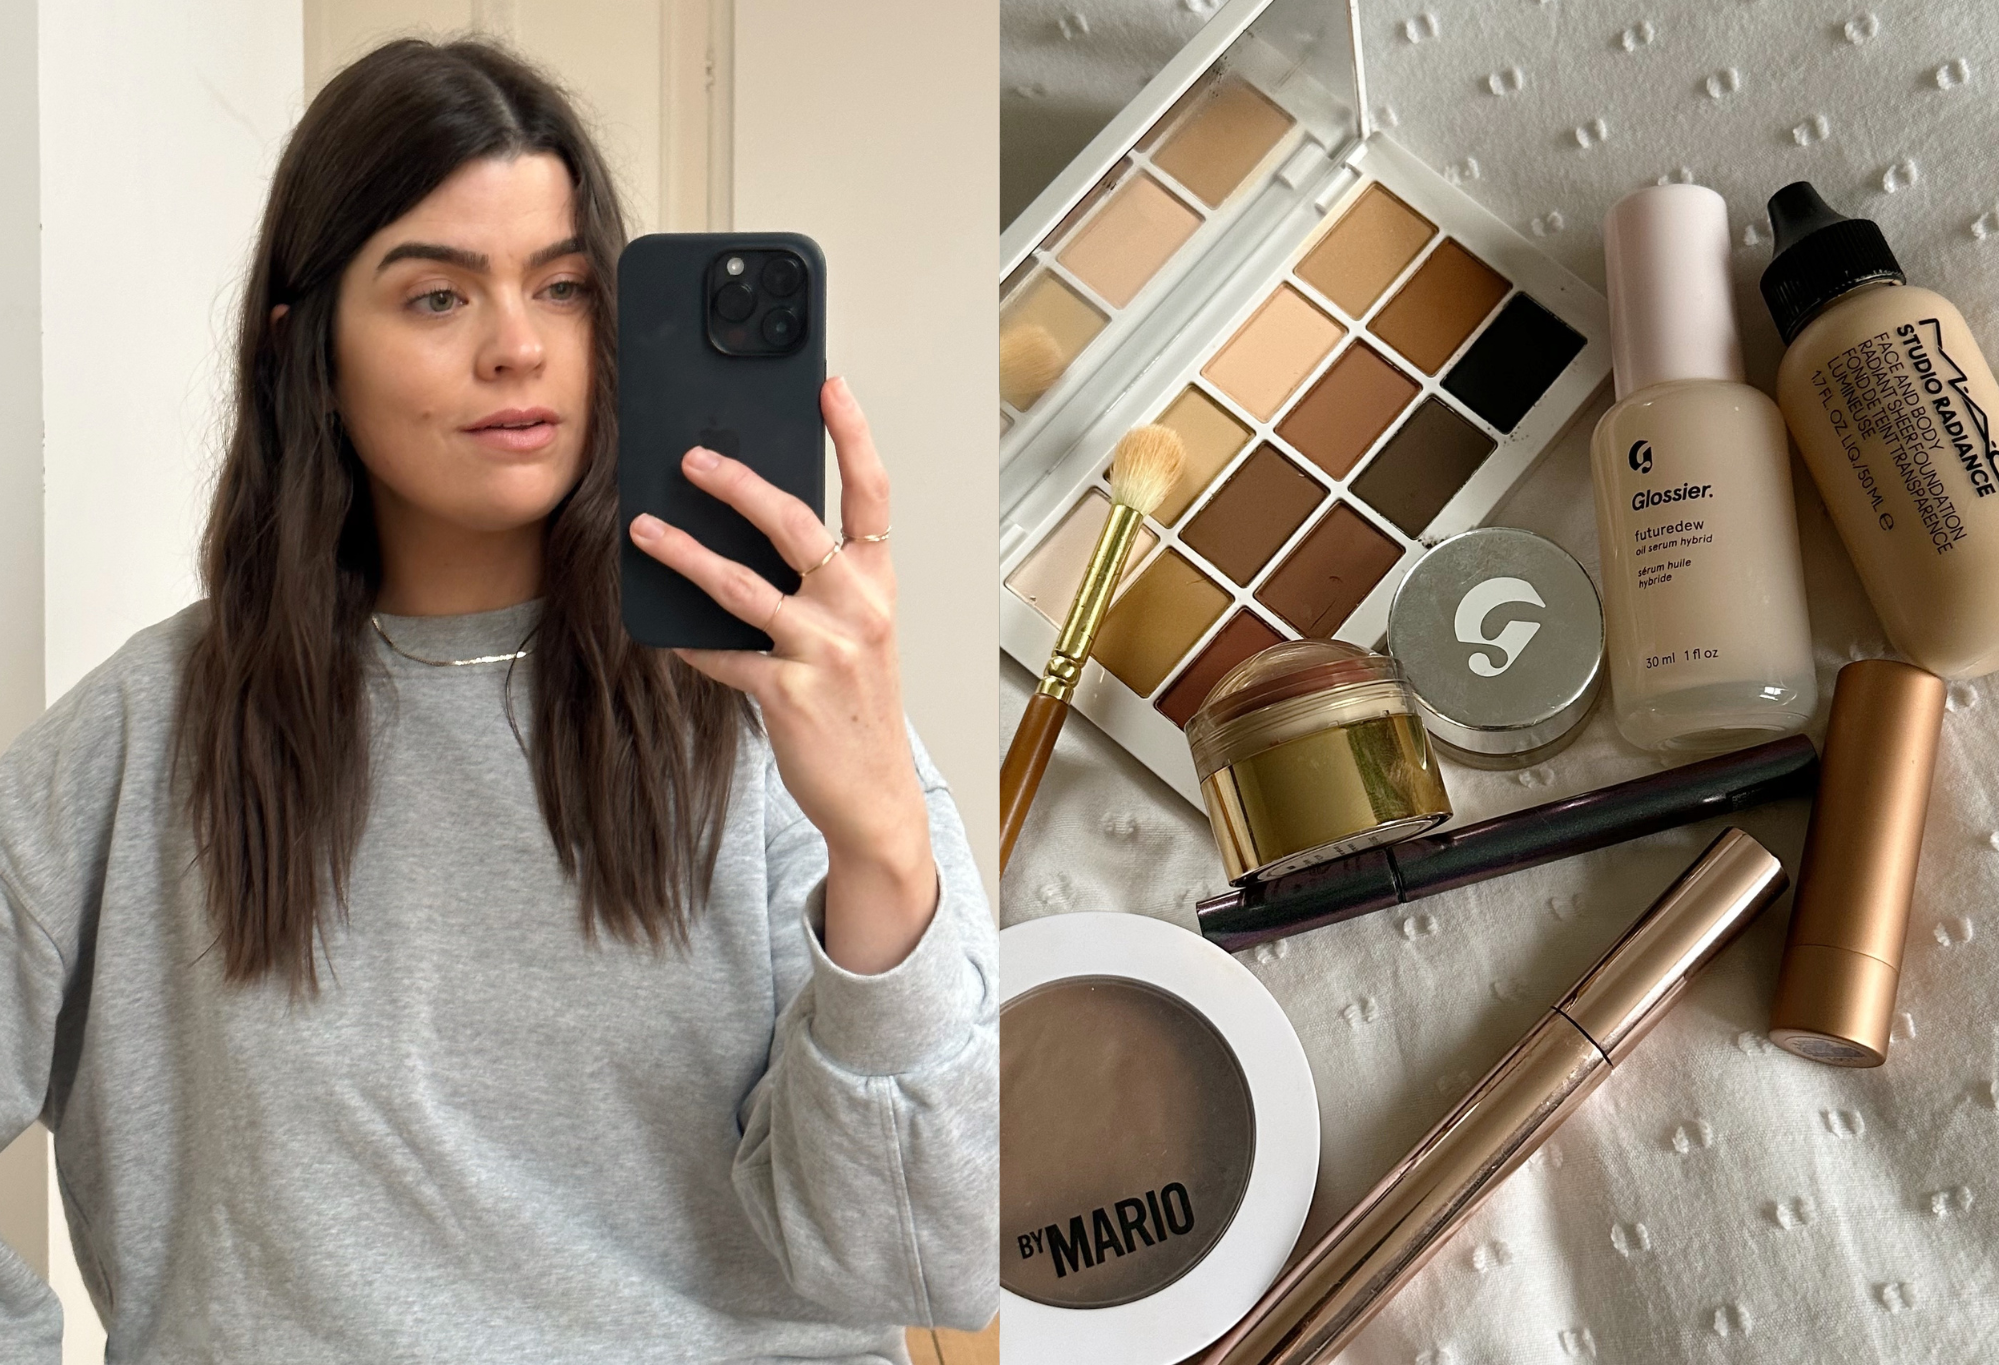 Here’s What I’m Adding To My Winter Makeup Bag For Some
Sun-Kissed Vibes